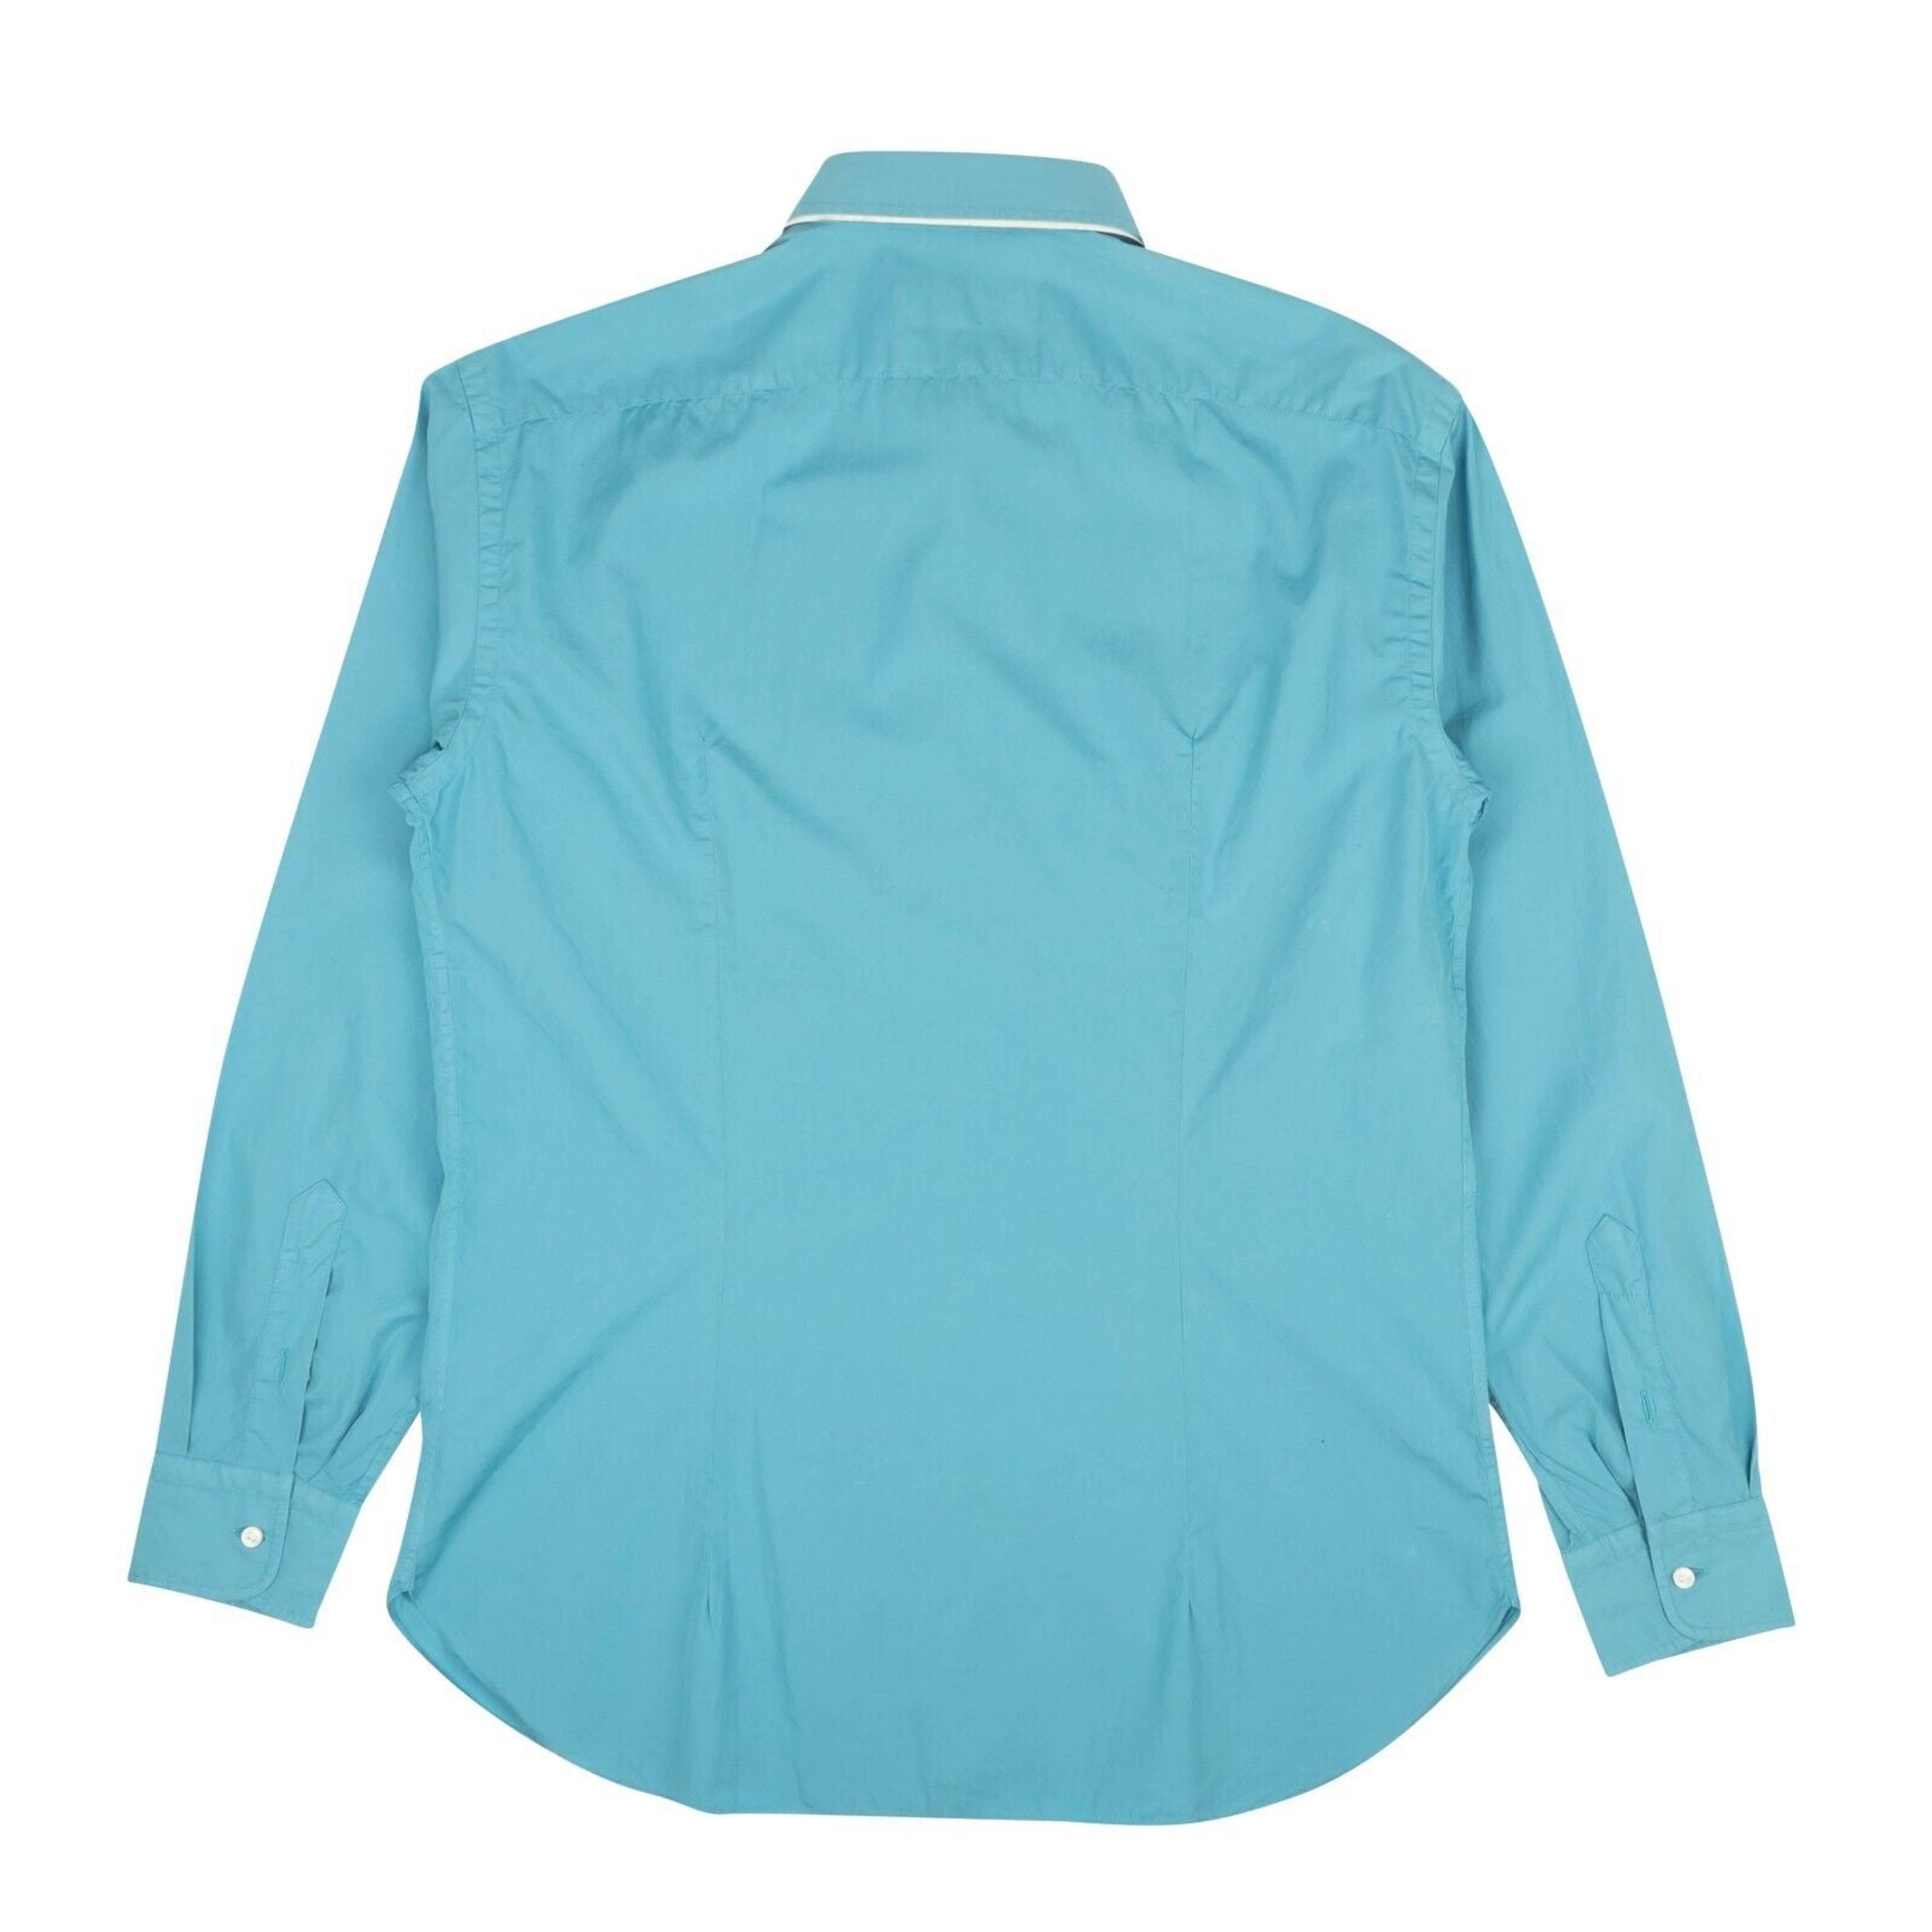 Alternate View 2 of Teal Blue Slim-Fit Long Sleeve Cotton Casual Shirt